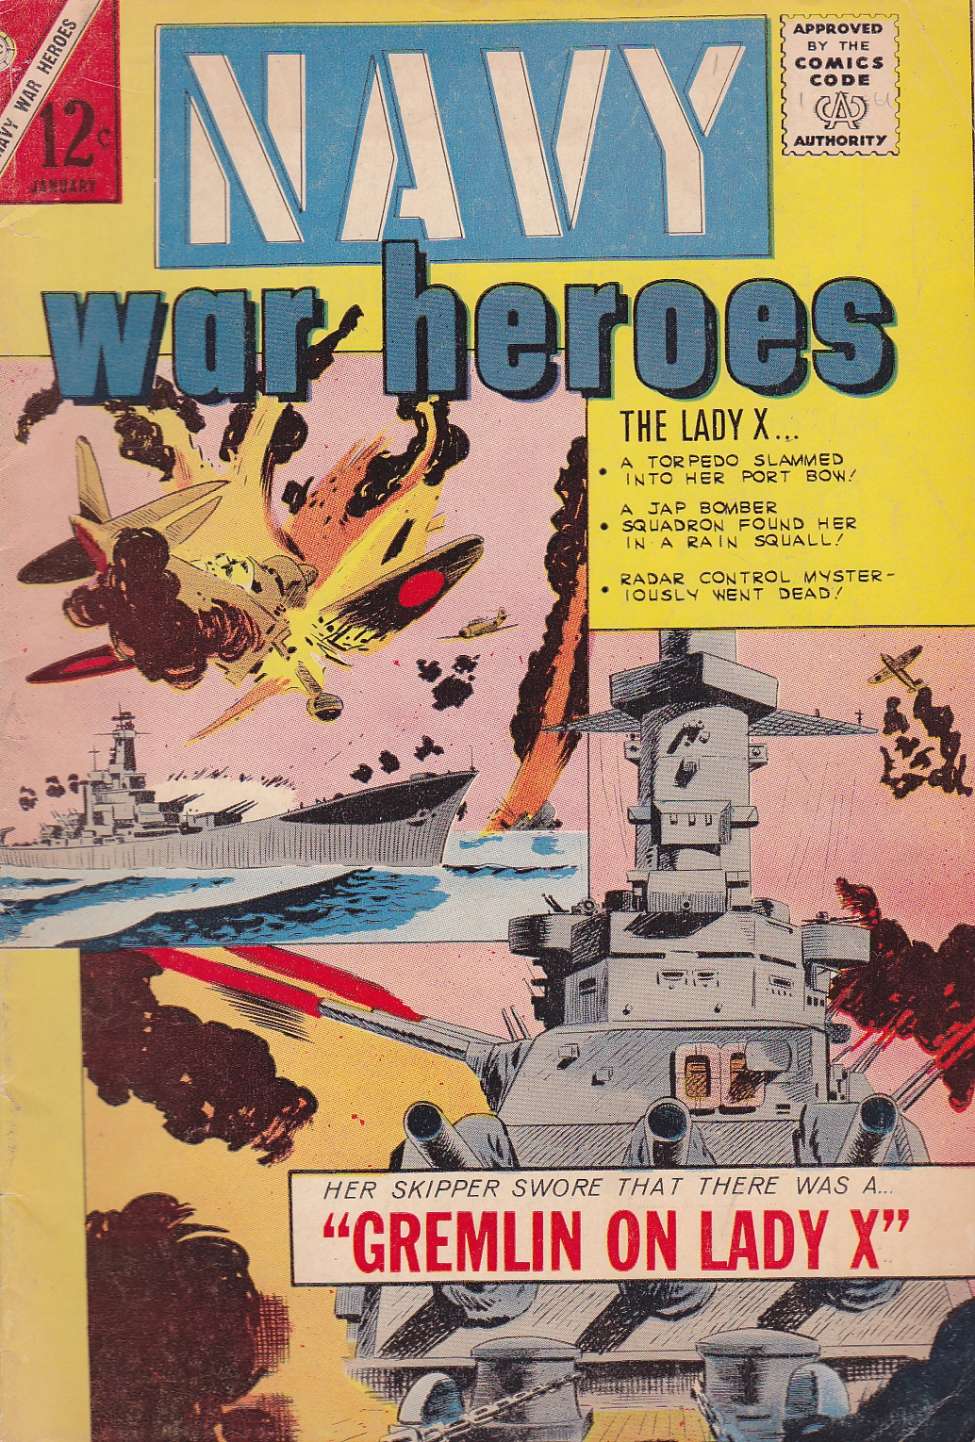 Book Cover For Navy War Heroes 1 - Version 1